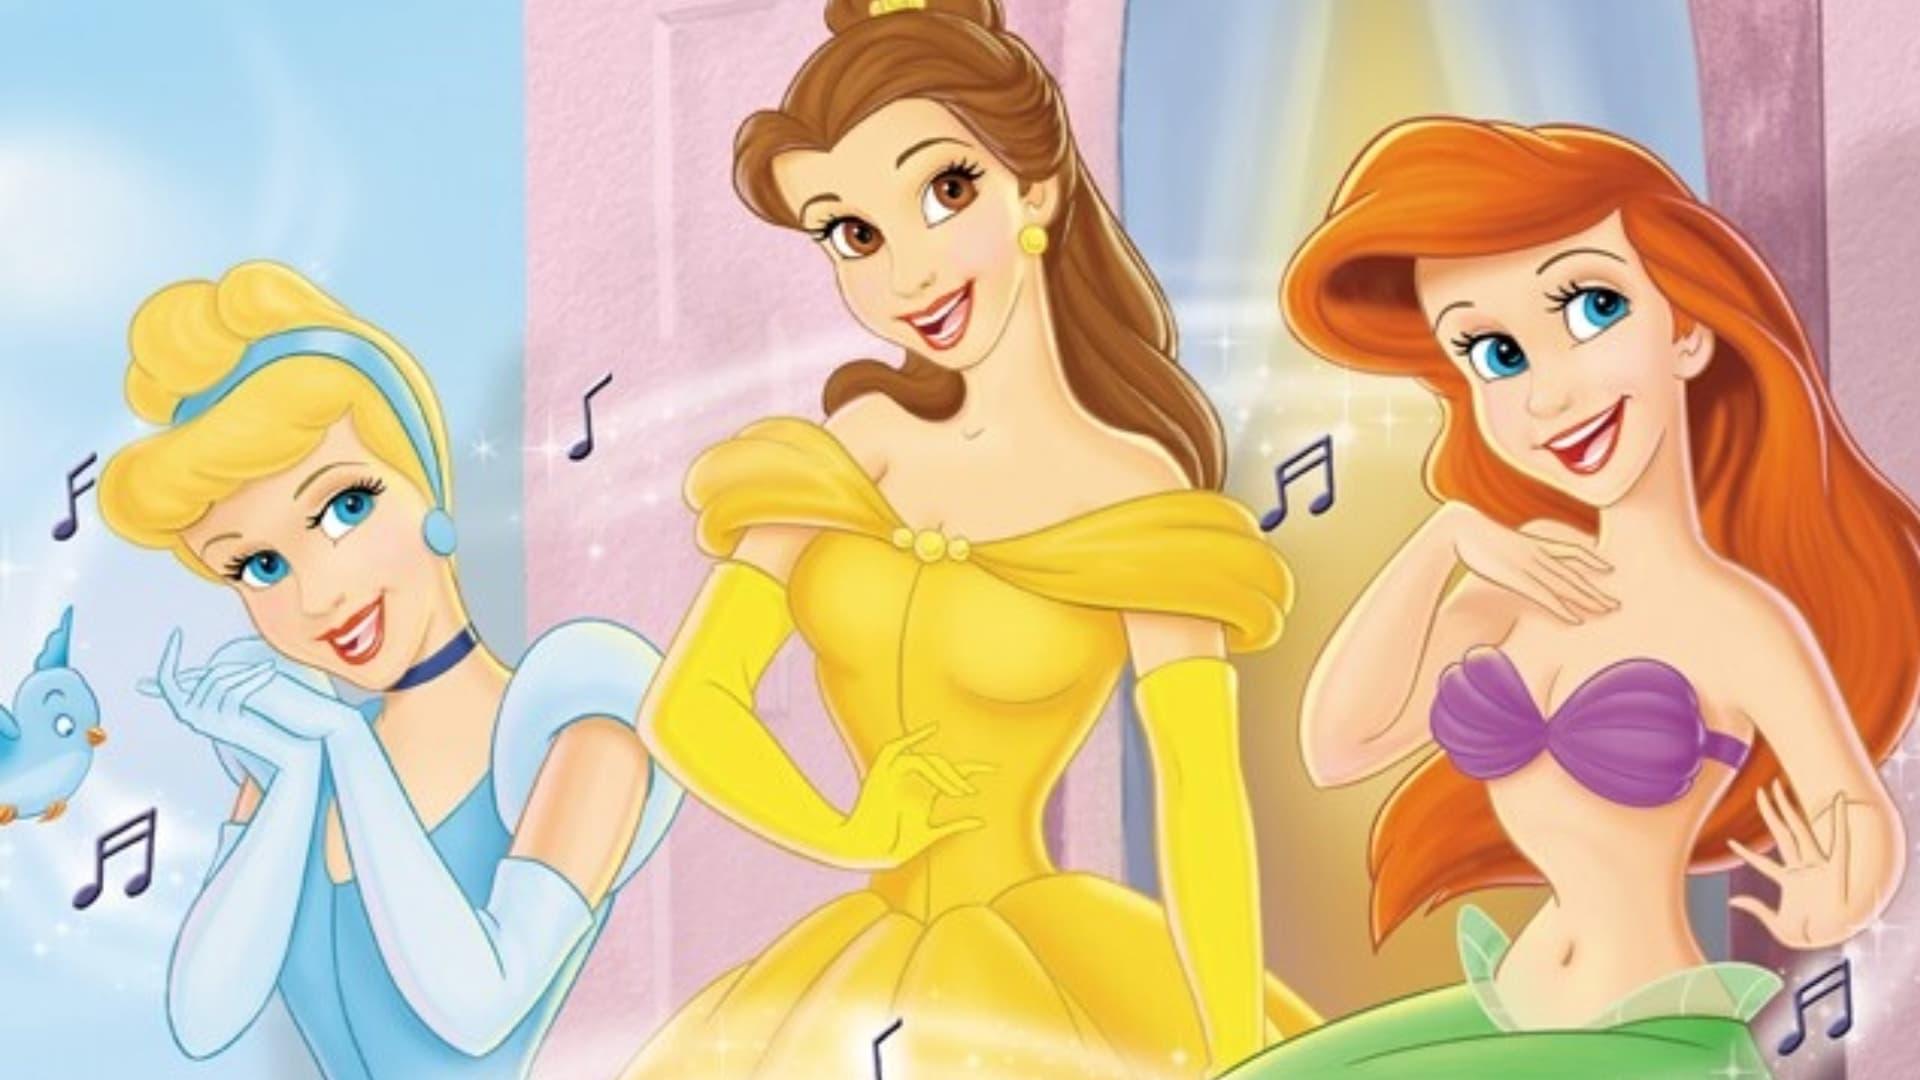 Disney Princess Sing Along Songs, Vol. 1 - Once Upon A Dream